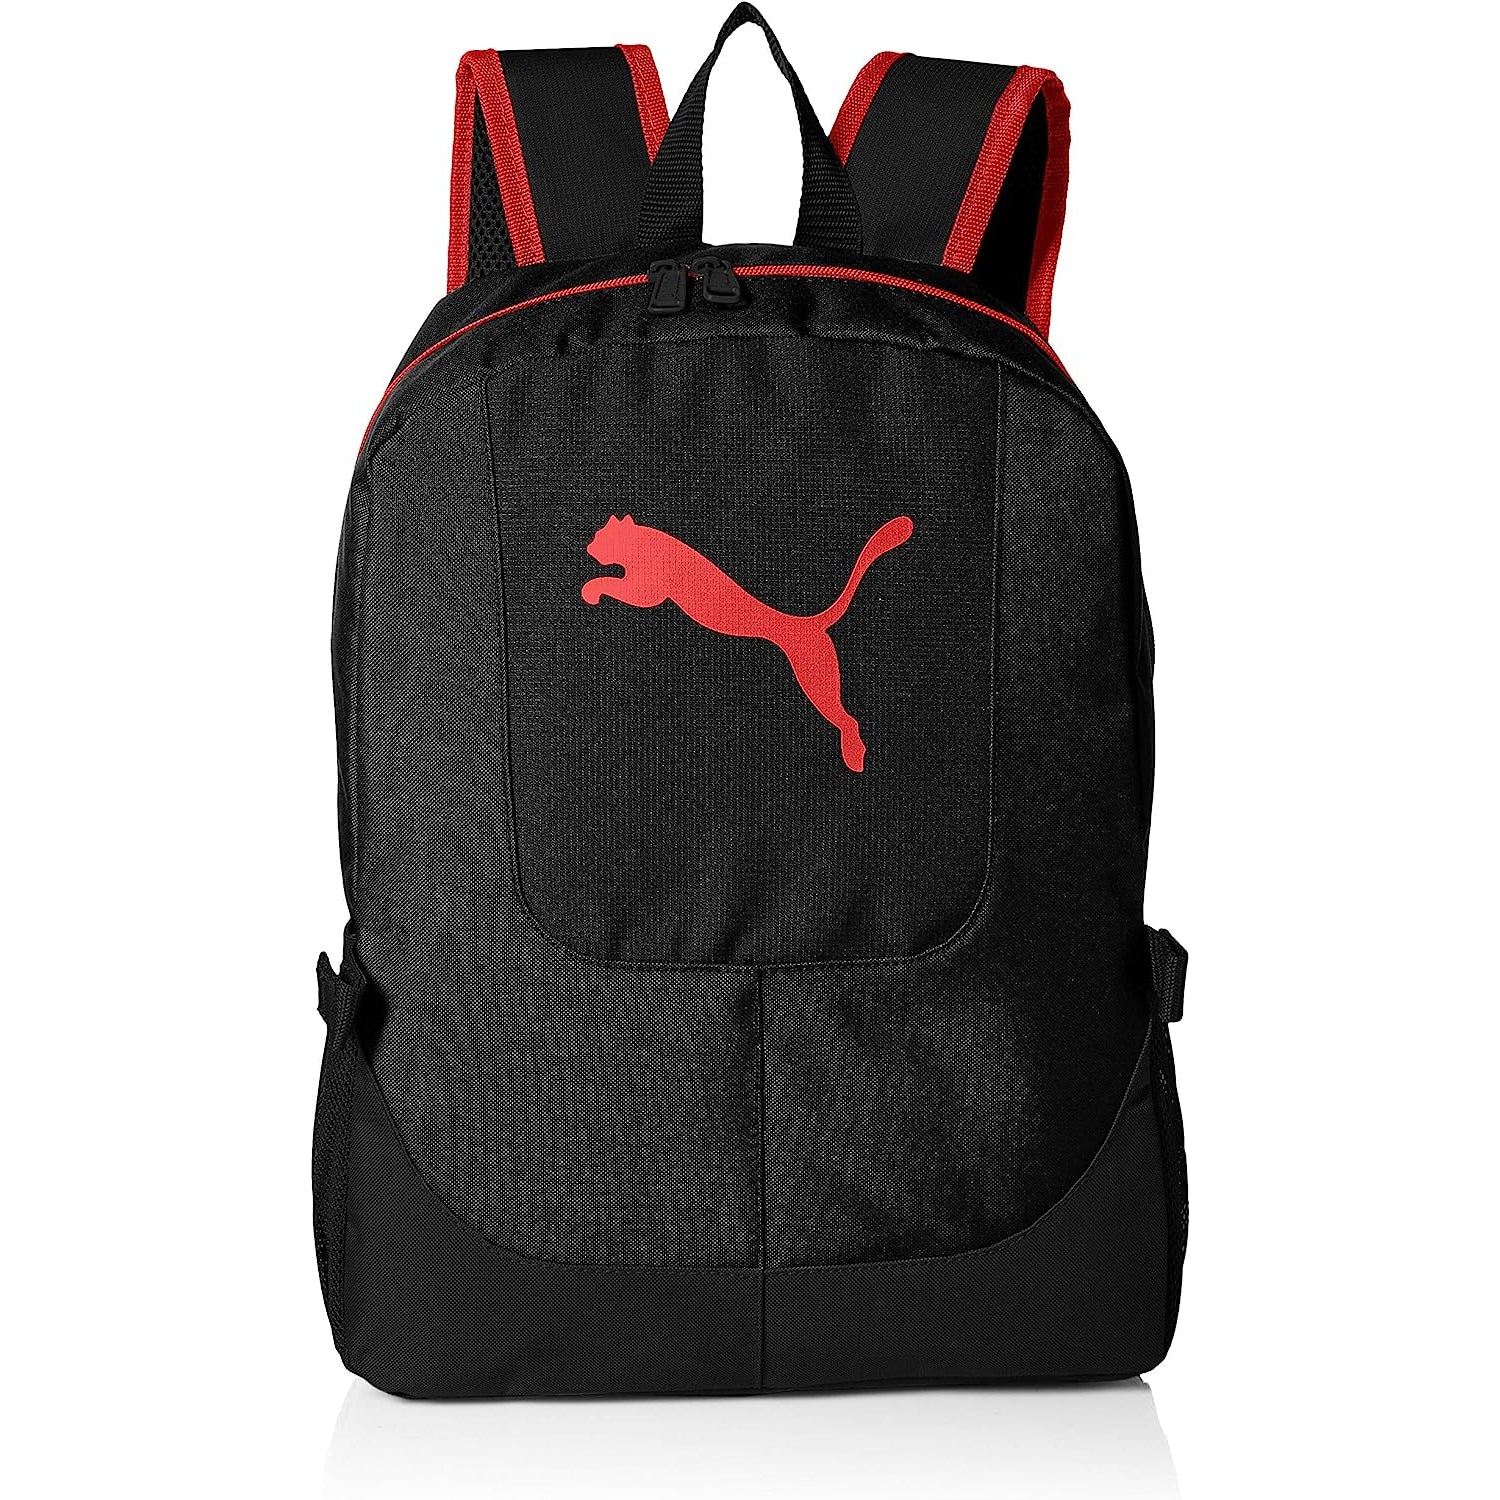 Puma Evercat Combo Backpack & Lunch Bag in Black/Red